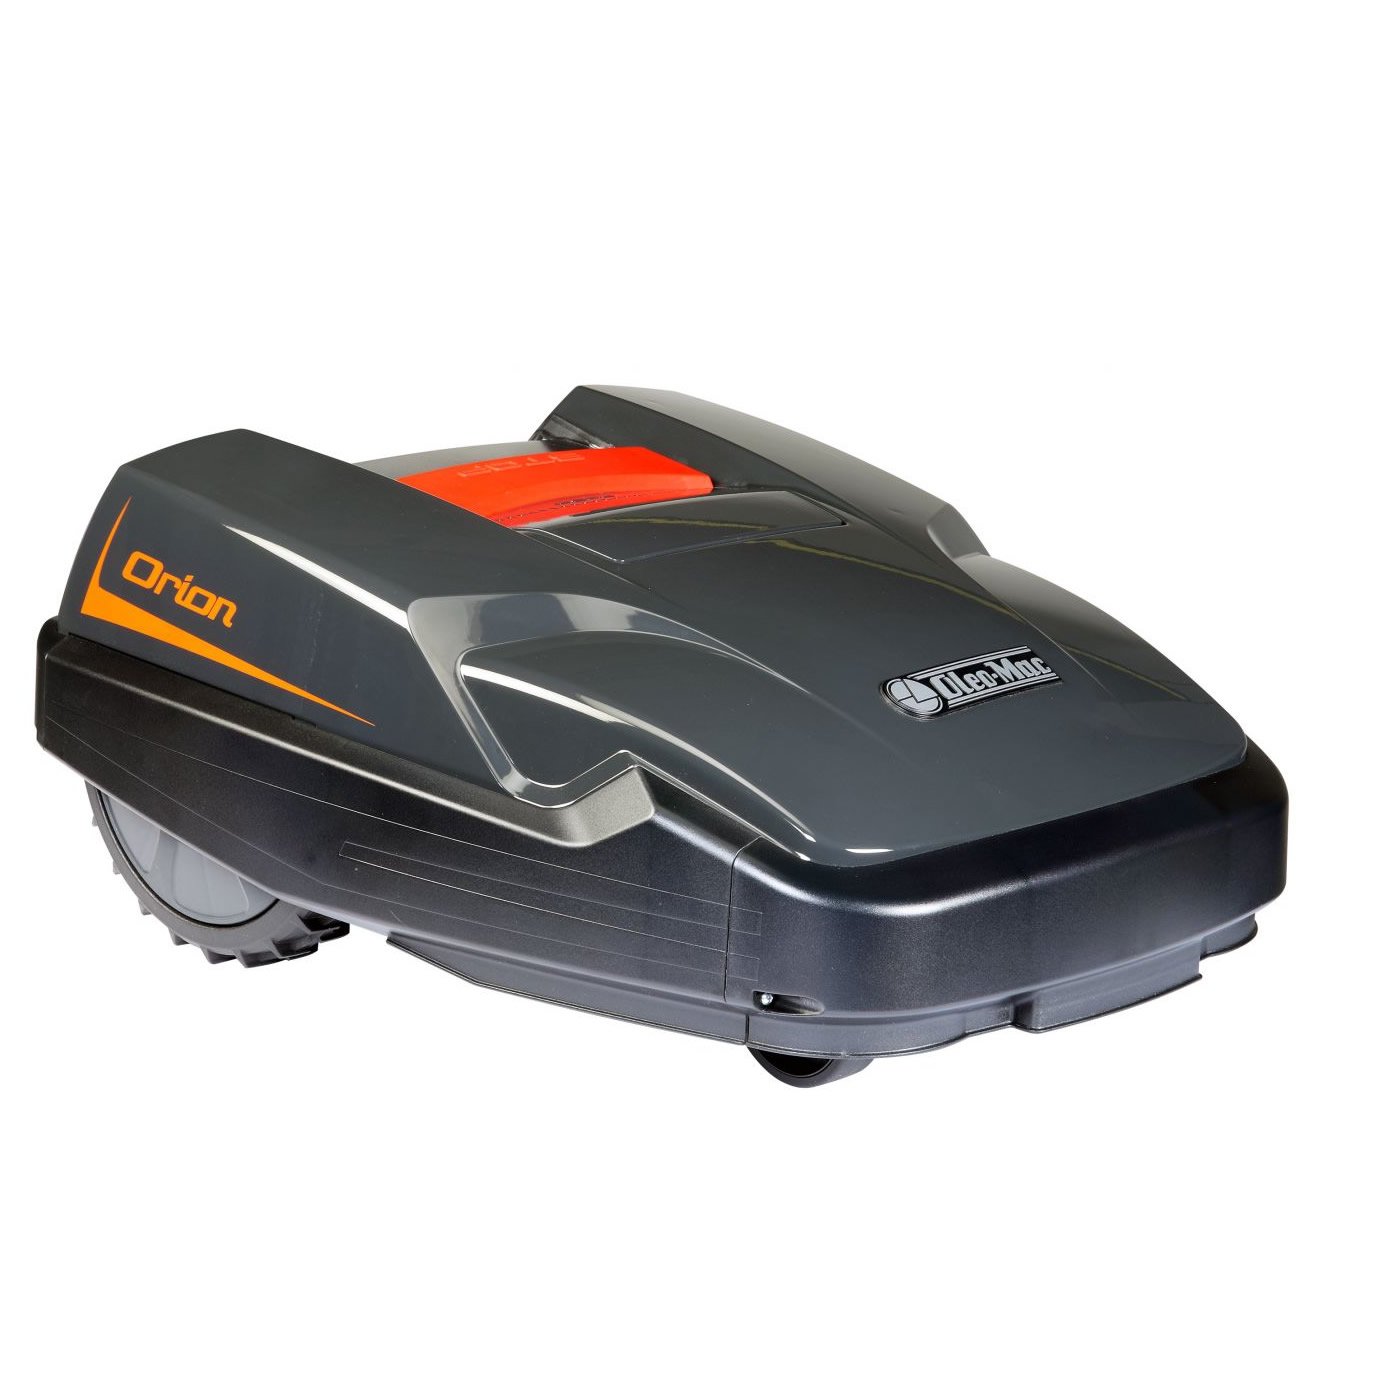 Oleo Mac Orion Fully Automated Robotic Lawn Mower with Docking Station Special Offer